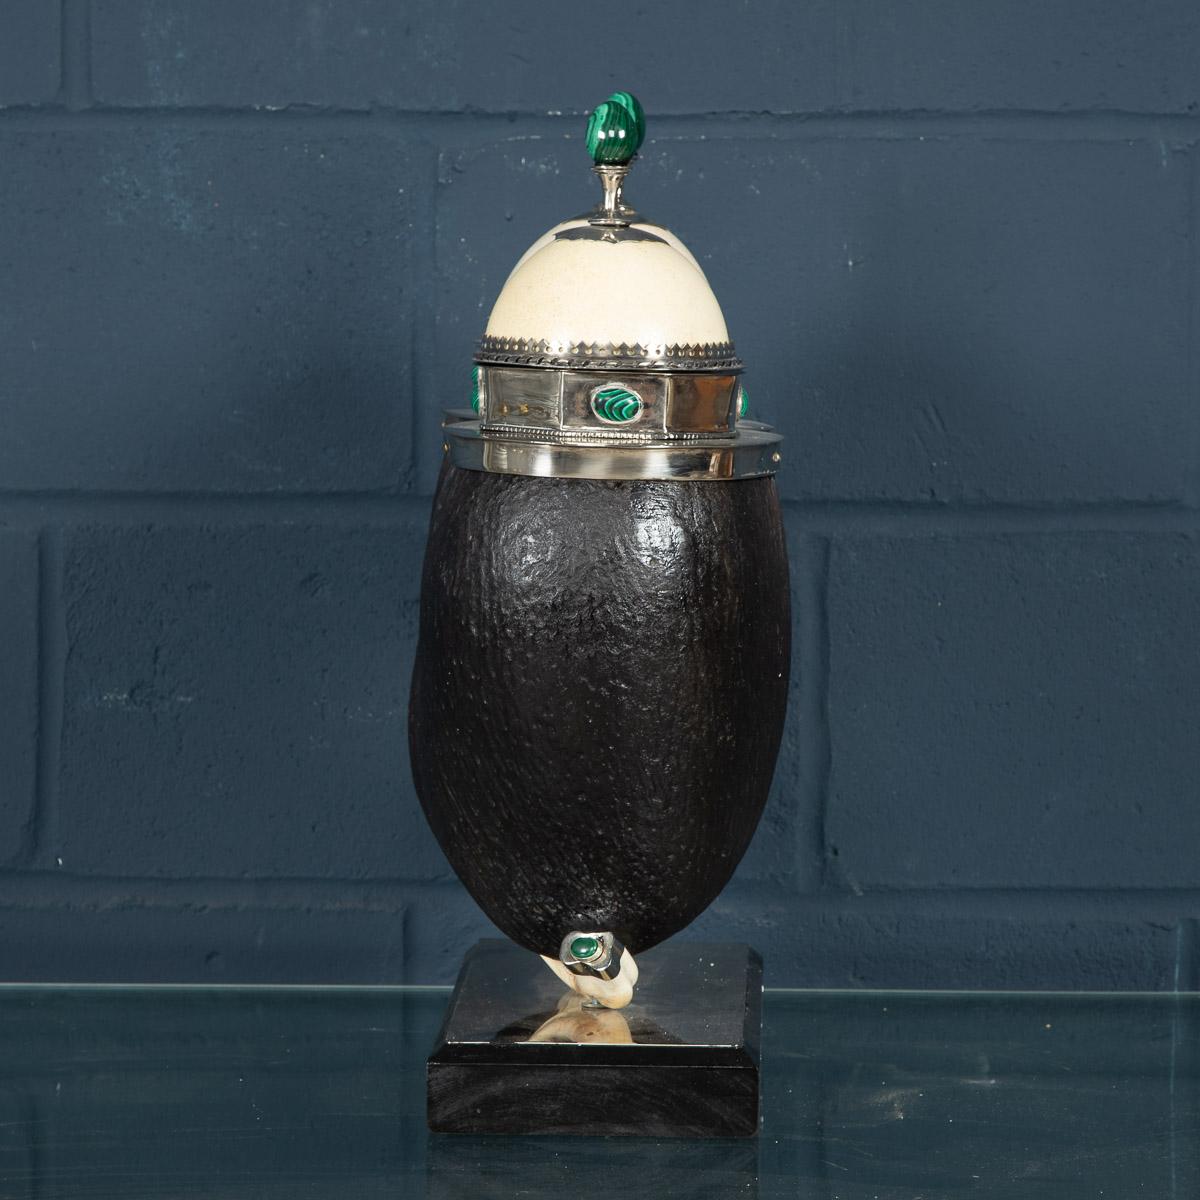 Signed Anthony Redmile, this extremely rare 1970s Coco de Mer Seychelles double coconut box is one of the most unusual and finest examples of the great artist’s work. Silvered mounts, ostrich egg lids, embellished with malachite, cabochons and